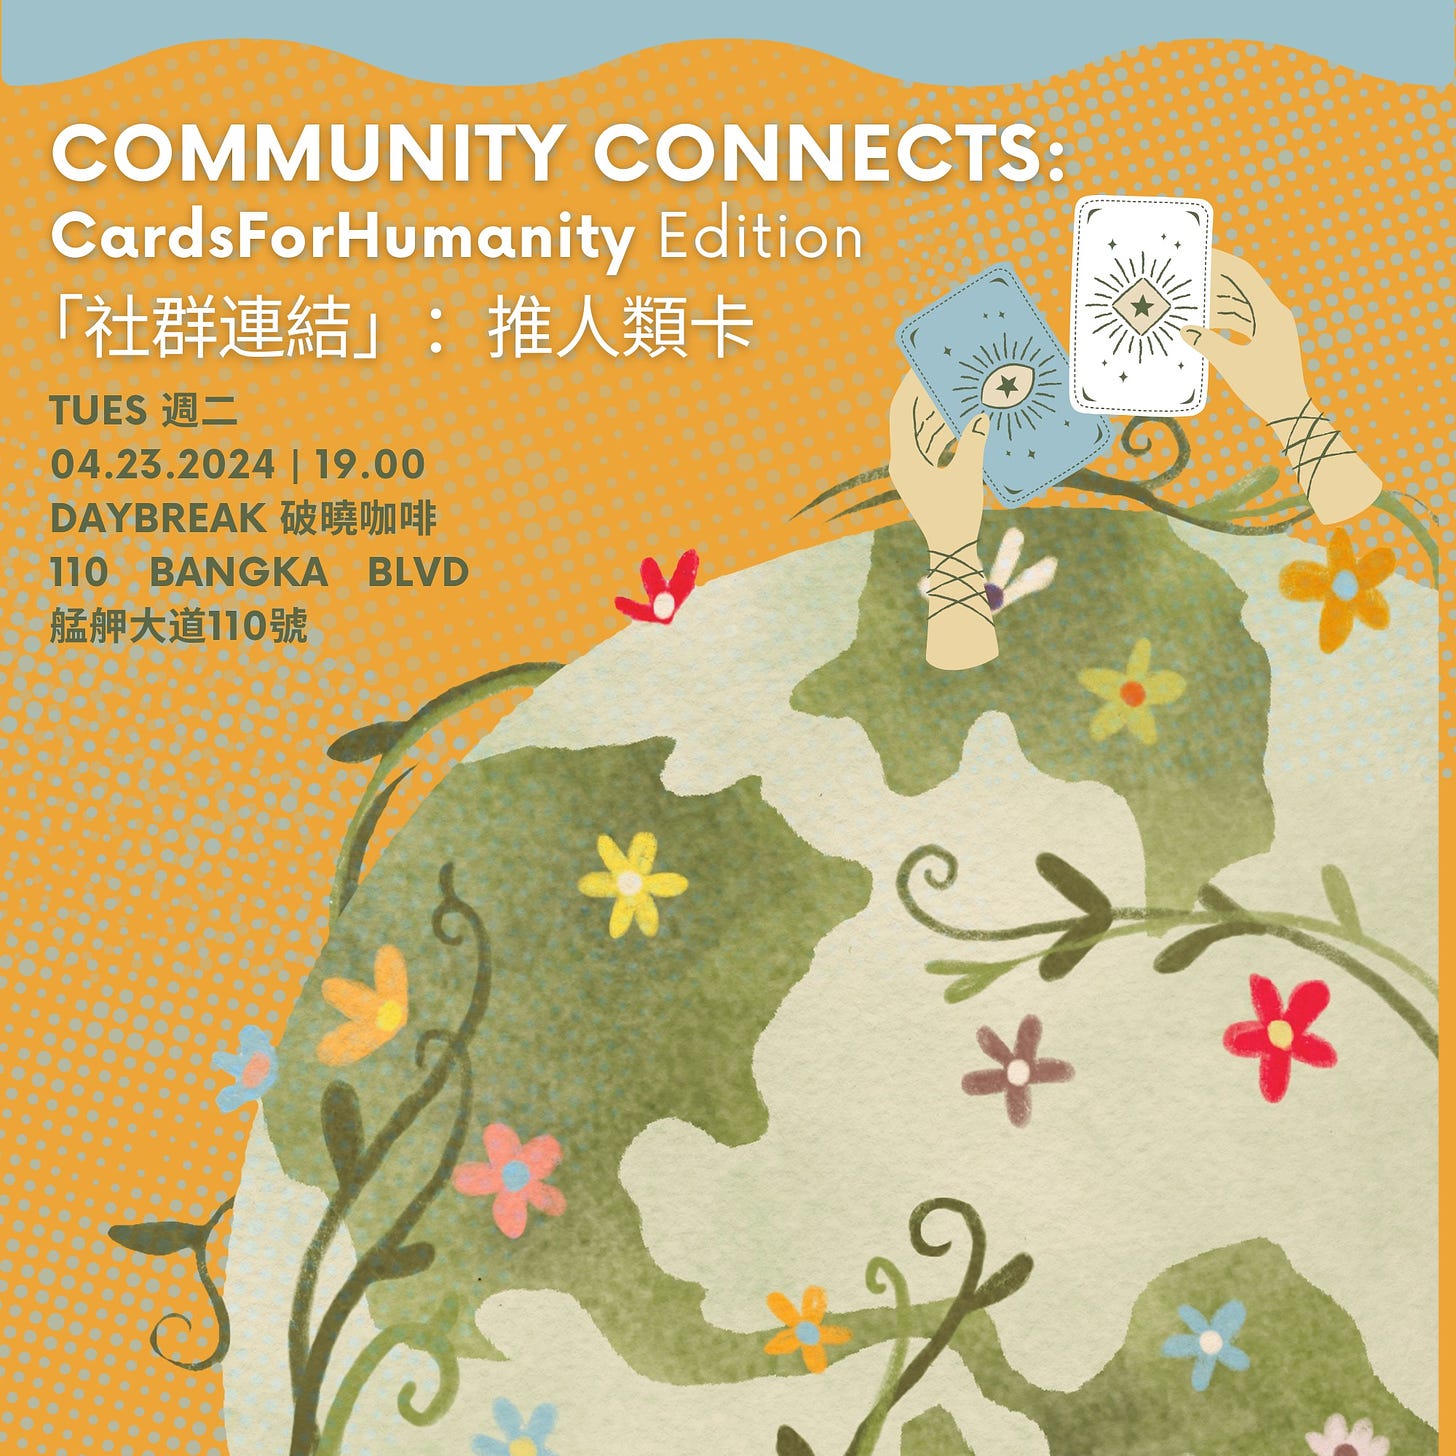 May be a doodle of text that says 'COMMUNITYCONNECTS: COMMUNITY CONNECTS CardsForHumanityEdition CardsForHumanity Edition 「社群連結」：推人類卡 推人類卡 「社群連結」 TUES TUES週二 週二 04.23.2024 19.00 DAYBREAK DAYBREAK破曉咖啡 破曉咖啡 :110. BANGKA BLVD 猛岬大道110號'